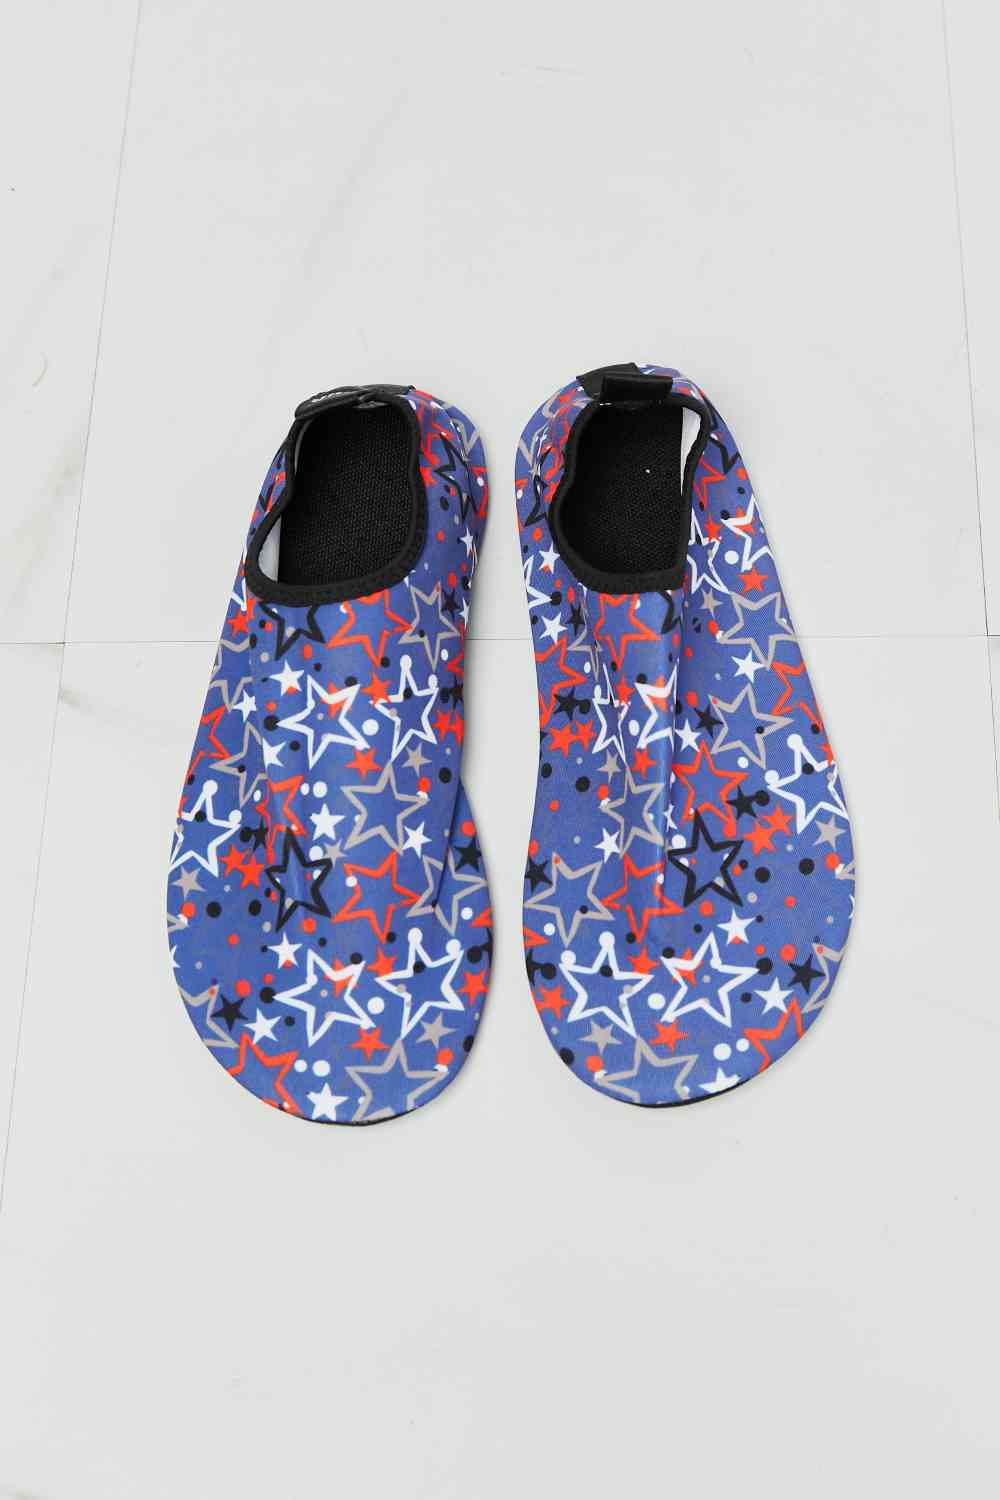 On The Shore Water Shoes in Navy - Kawaii Stop - Aqua Footwear, Beach Adventures, Beach Days, Classic Style, Comfortable Shoes, Durable Materials, Kayaking, Melody, Navy Blue, Outdoor Activities, Printed Design, Rubber Sole, Safety First, Ship from USA, Slip-Resistant, Swimming, US Sizing, Water Protection, Water Shoes, Wet Surfaces